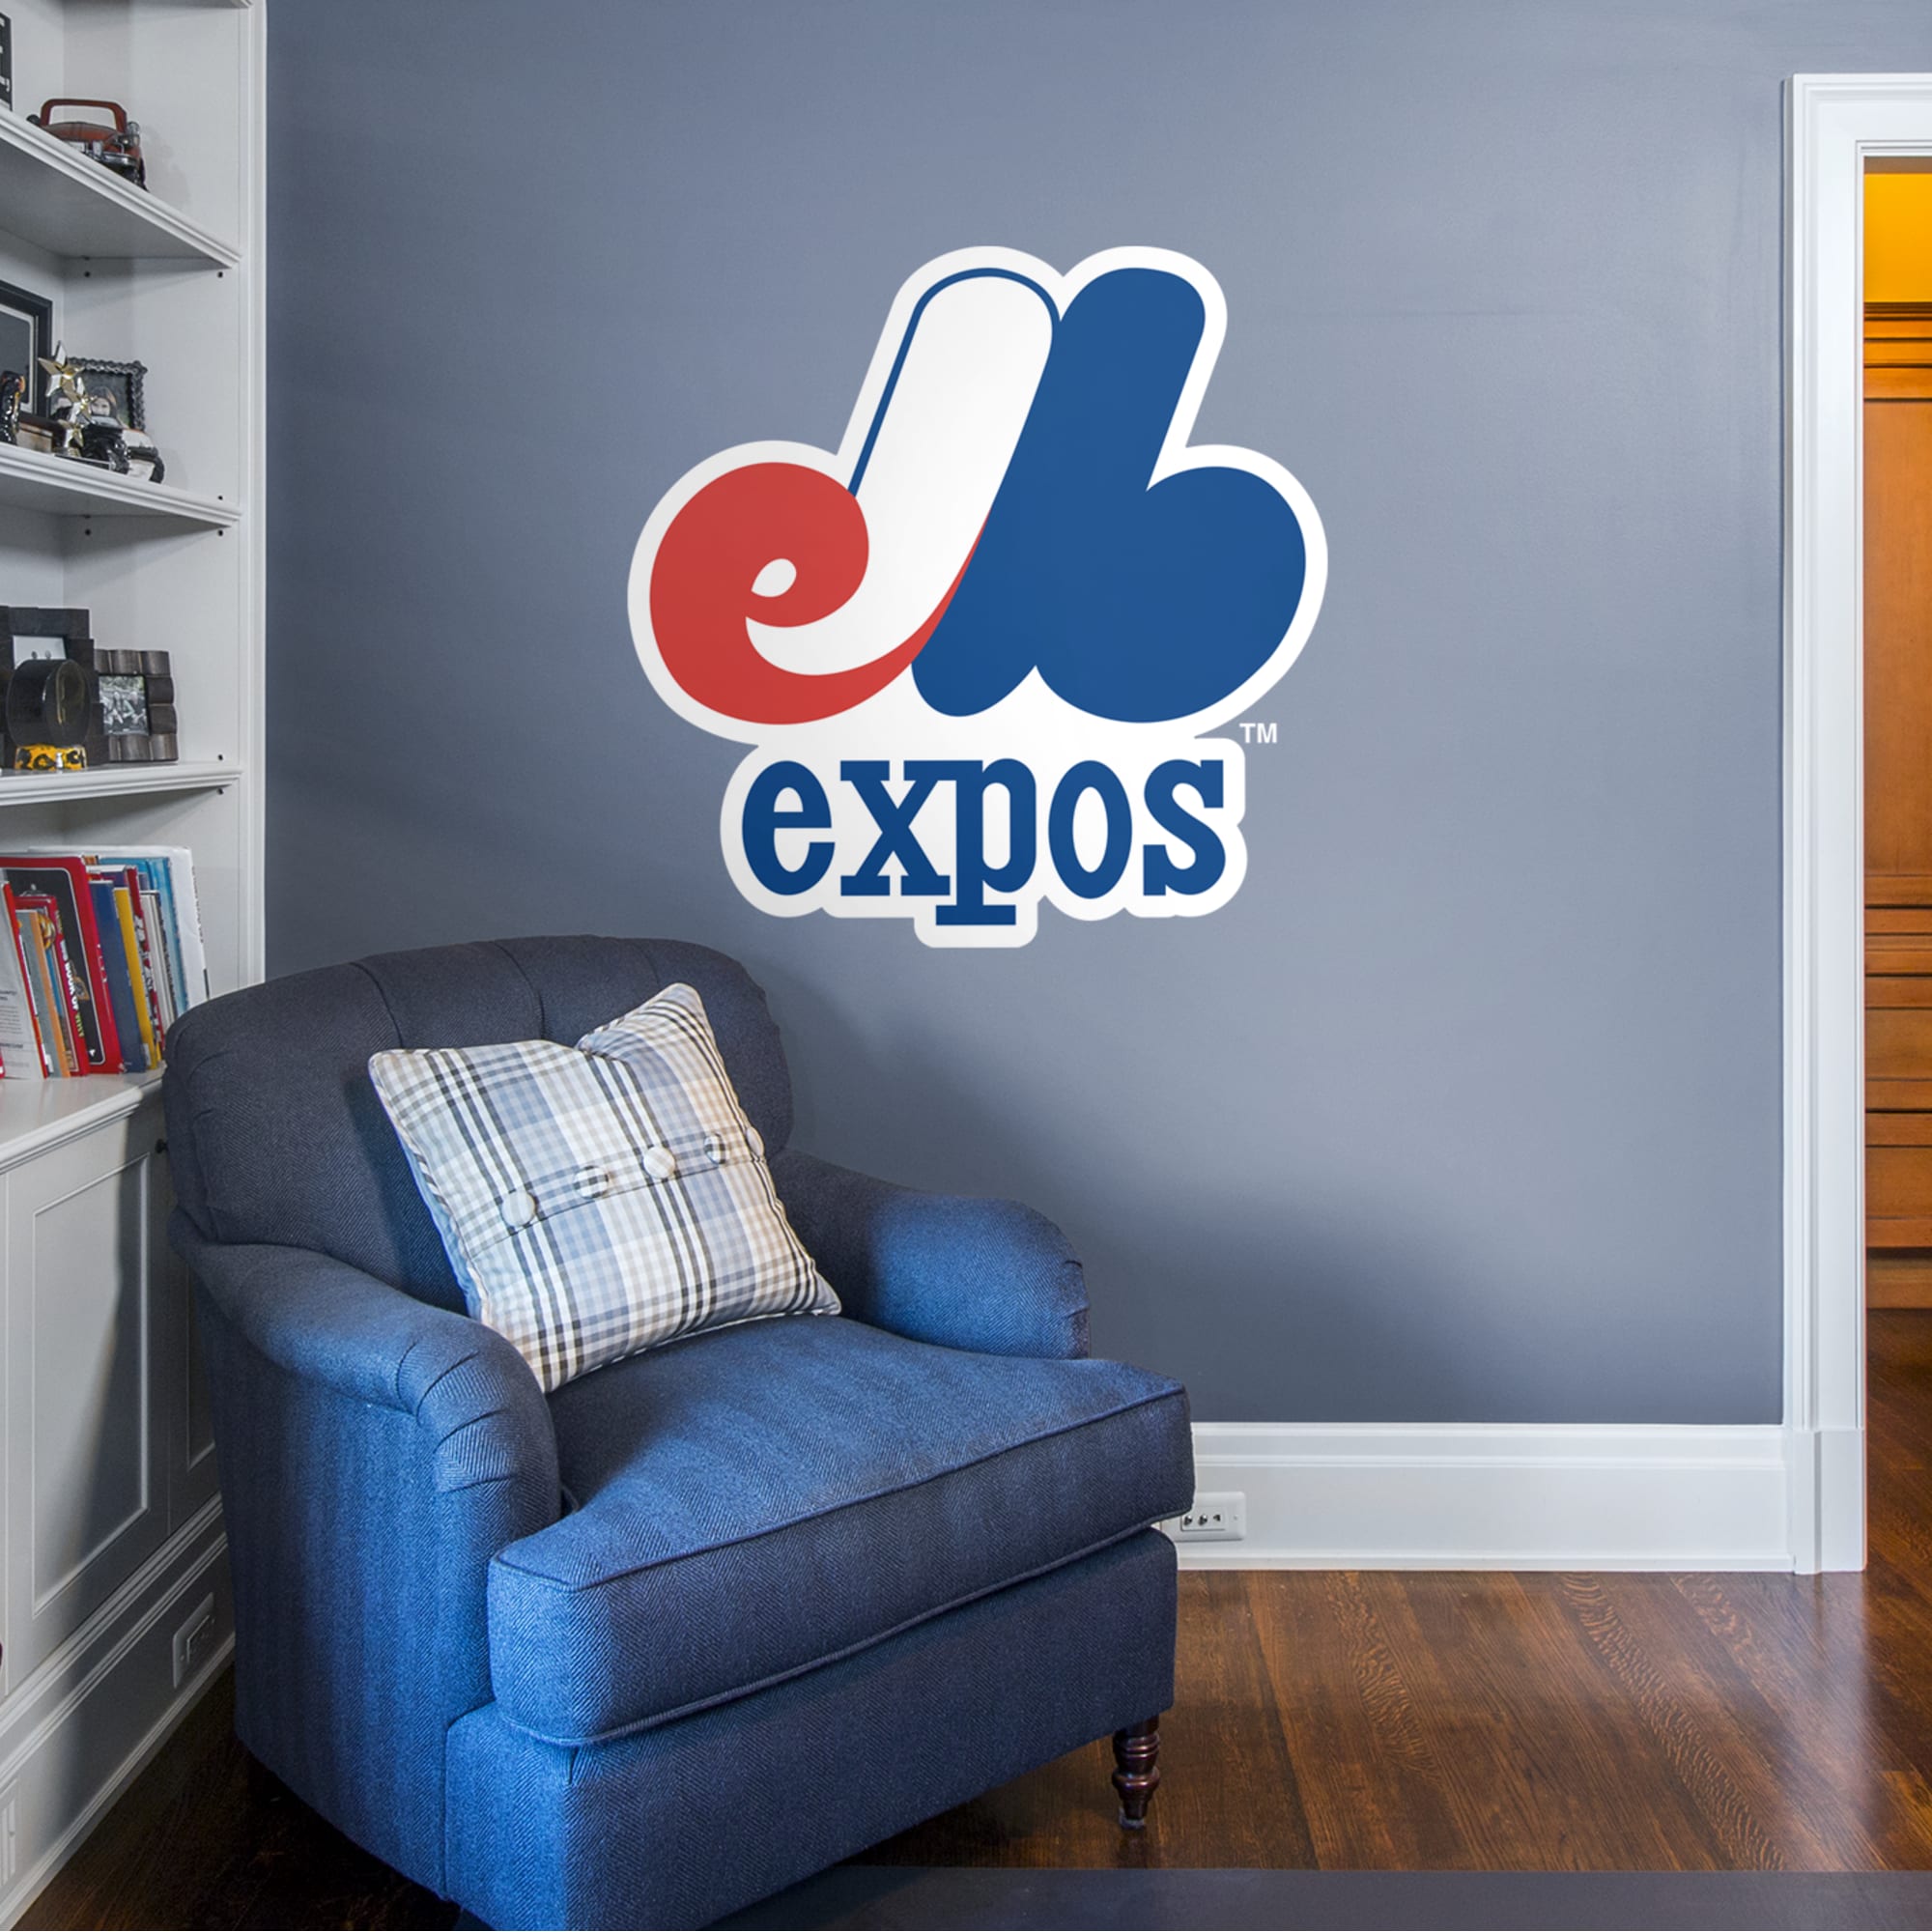 Montreal Expos for Washington Nationals: Classic Logo - Officially Licensed MLB Removable Wall Decal 40.0"W x 40.0"H by Fathead